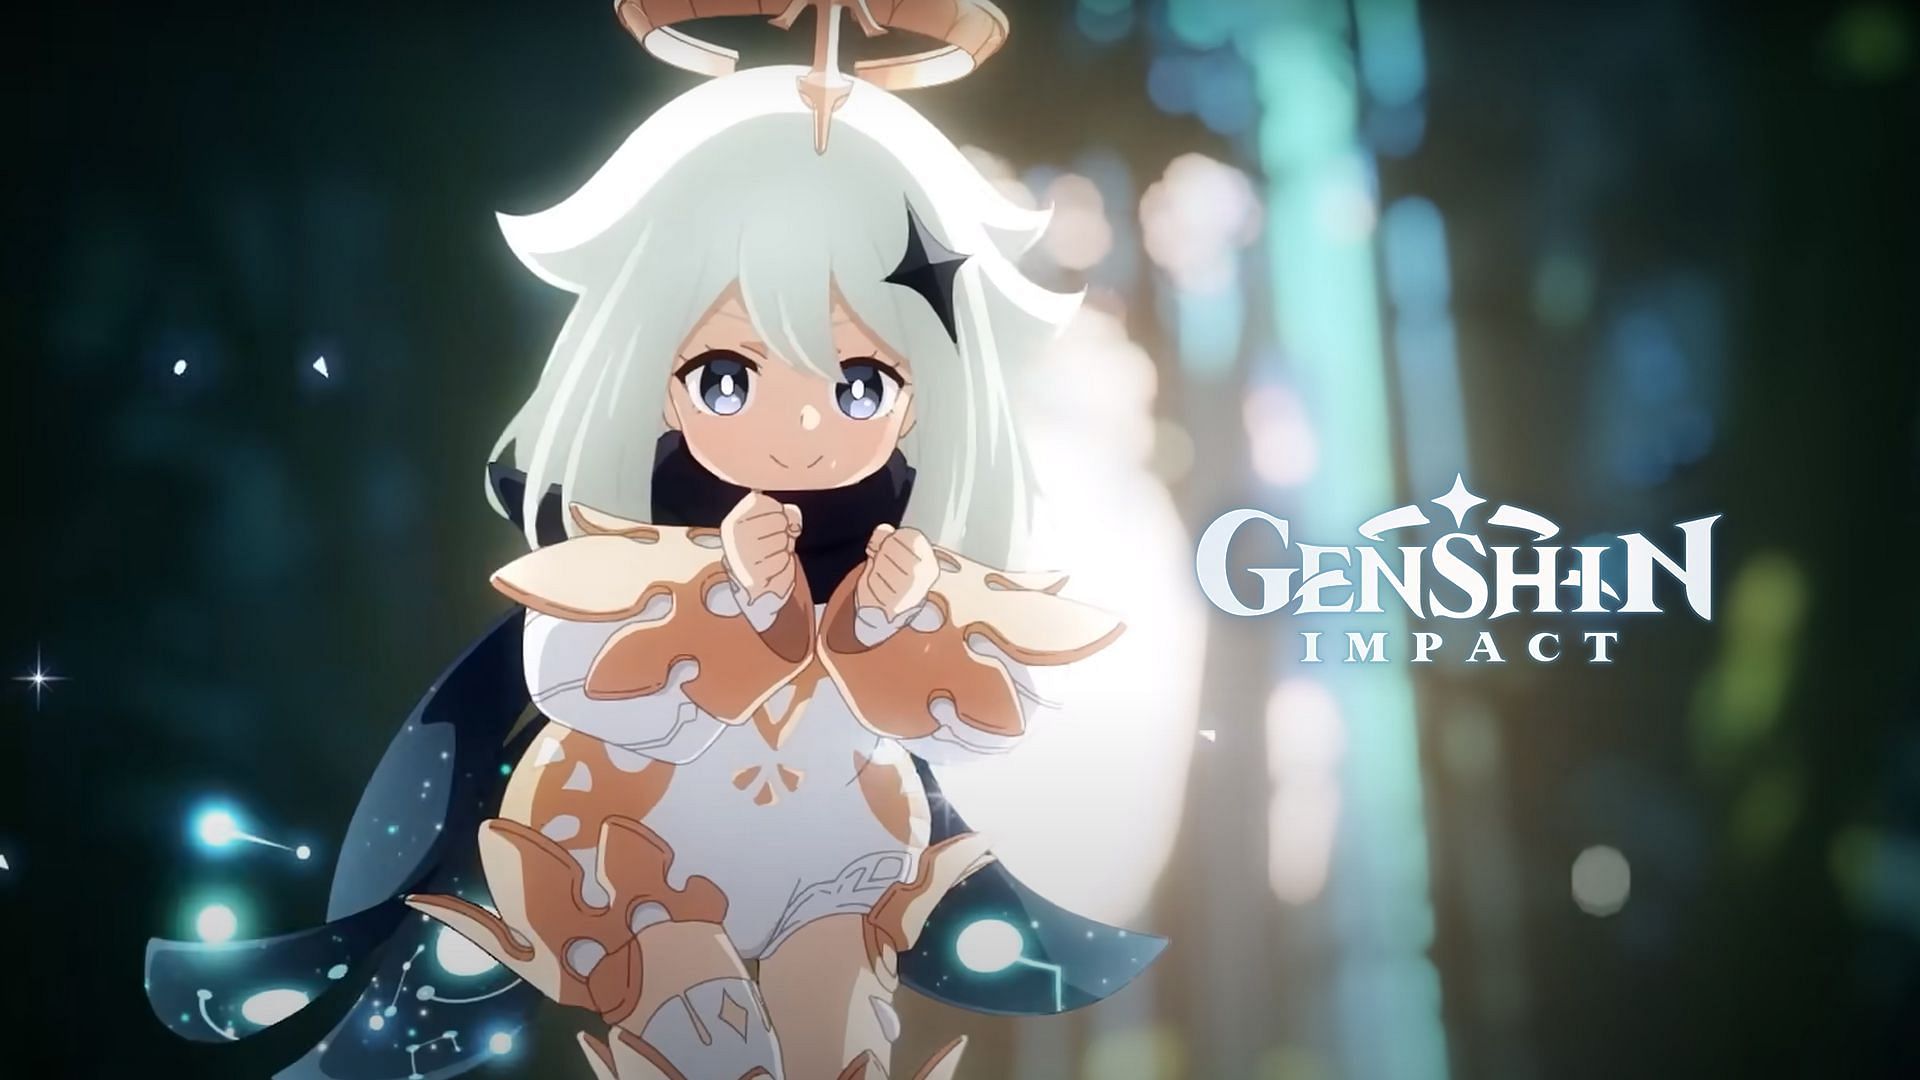 Some leaks indicate an upcoming trailer for the Genshin Impact anime.